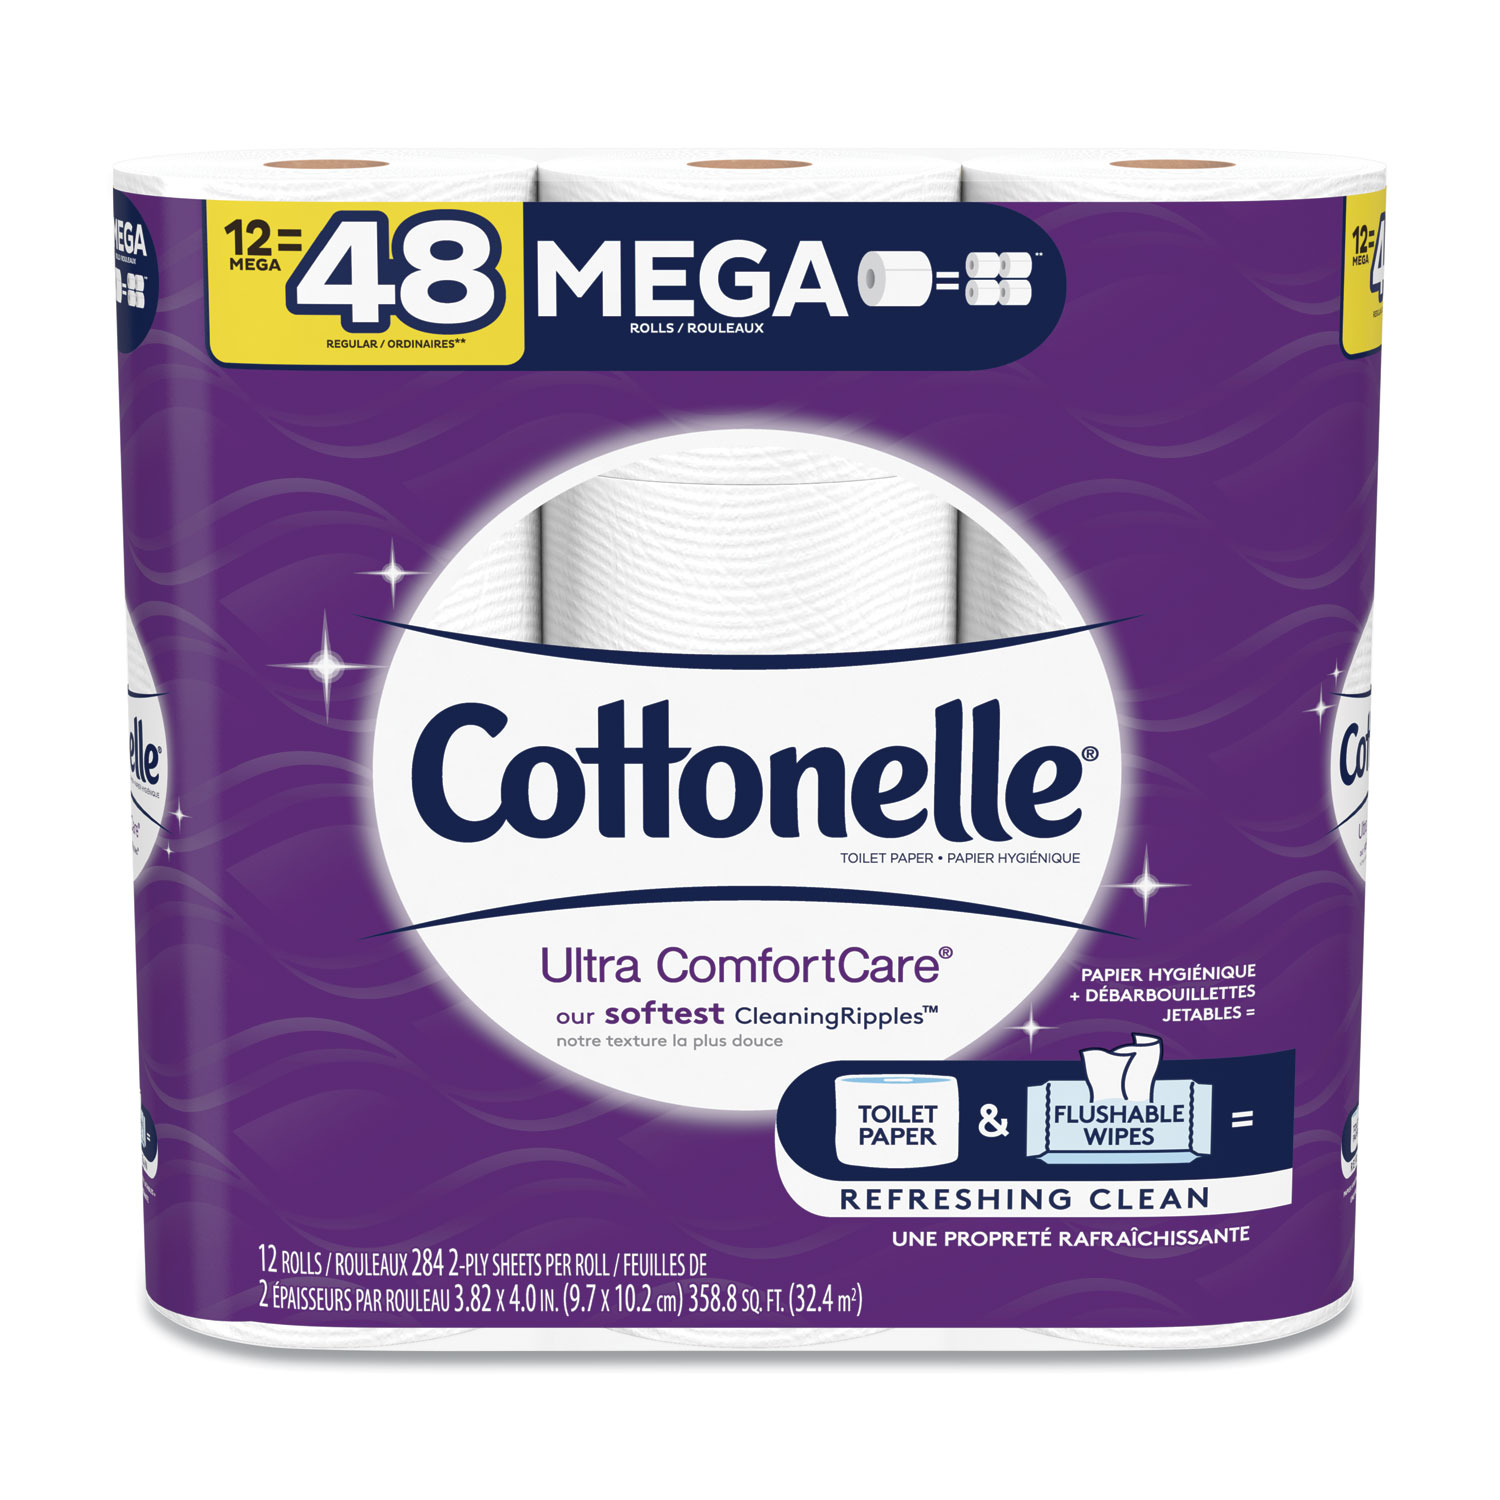  Cottonelle 48596 Ultra ComfortCare Toilet Paper, Soft Tissue, Mega Rolls, Septic Safe, 2 Ply, White, 284 Sheets/Roll, 12 Rolls (KCC48596) 